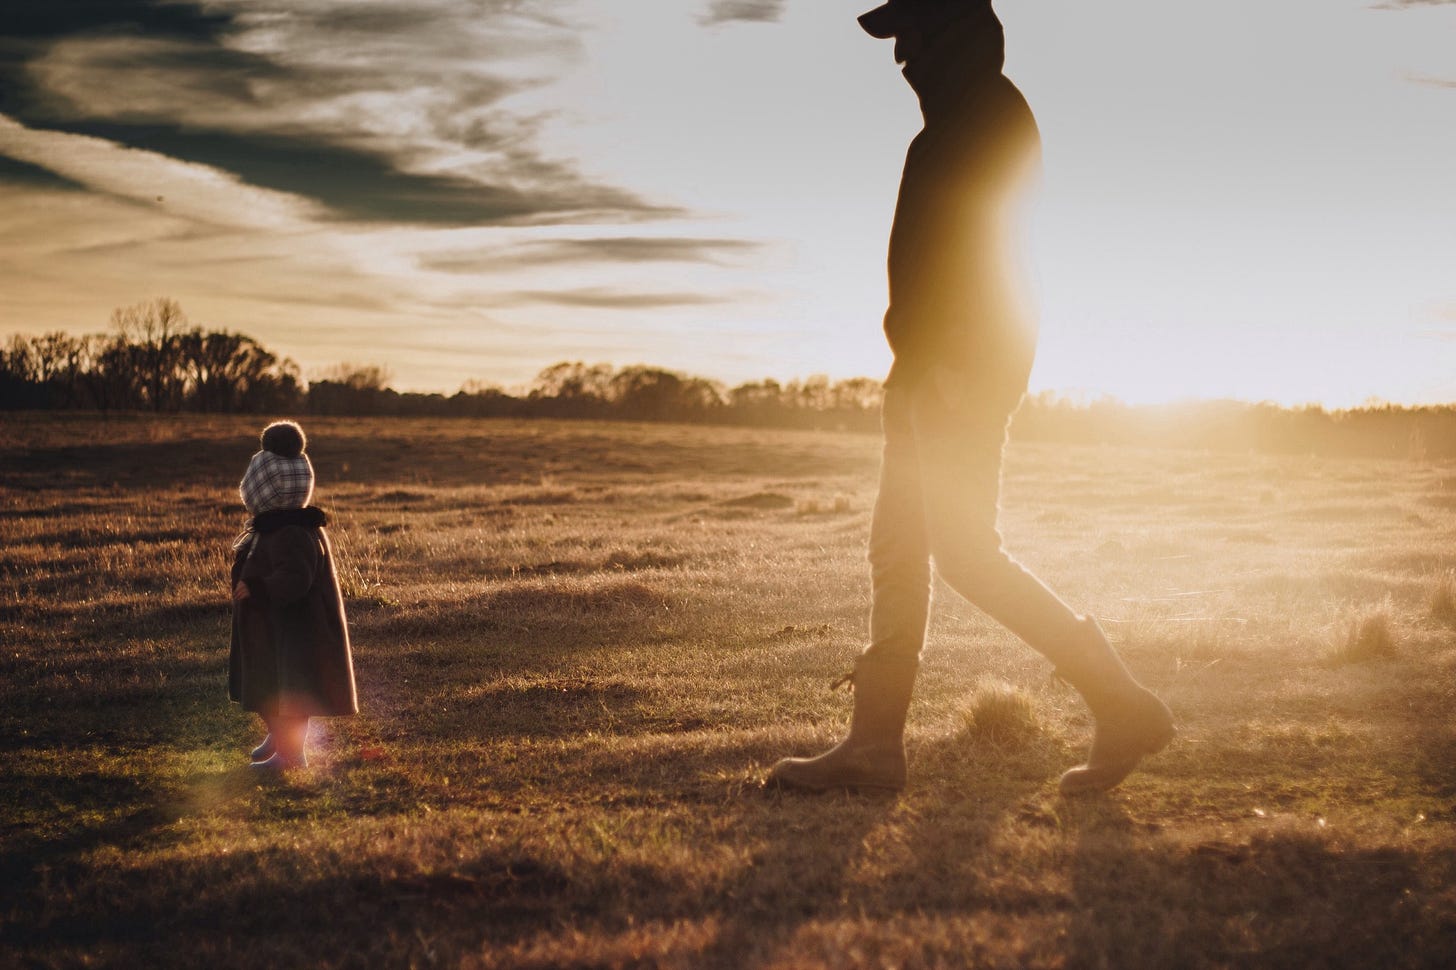 A father walks behind a small child in a field as the sun sets.